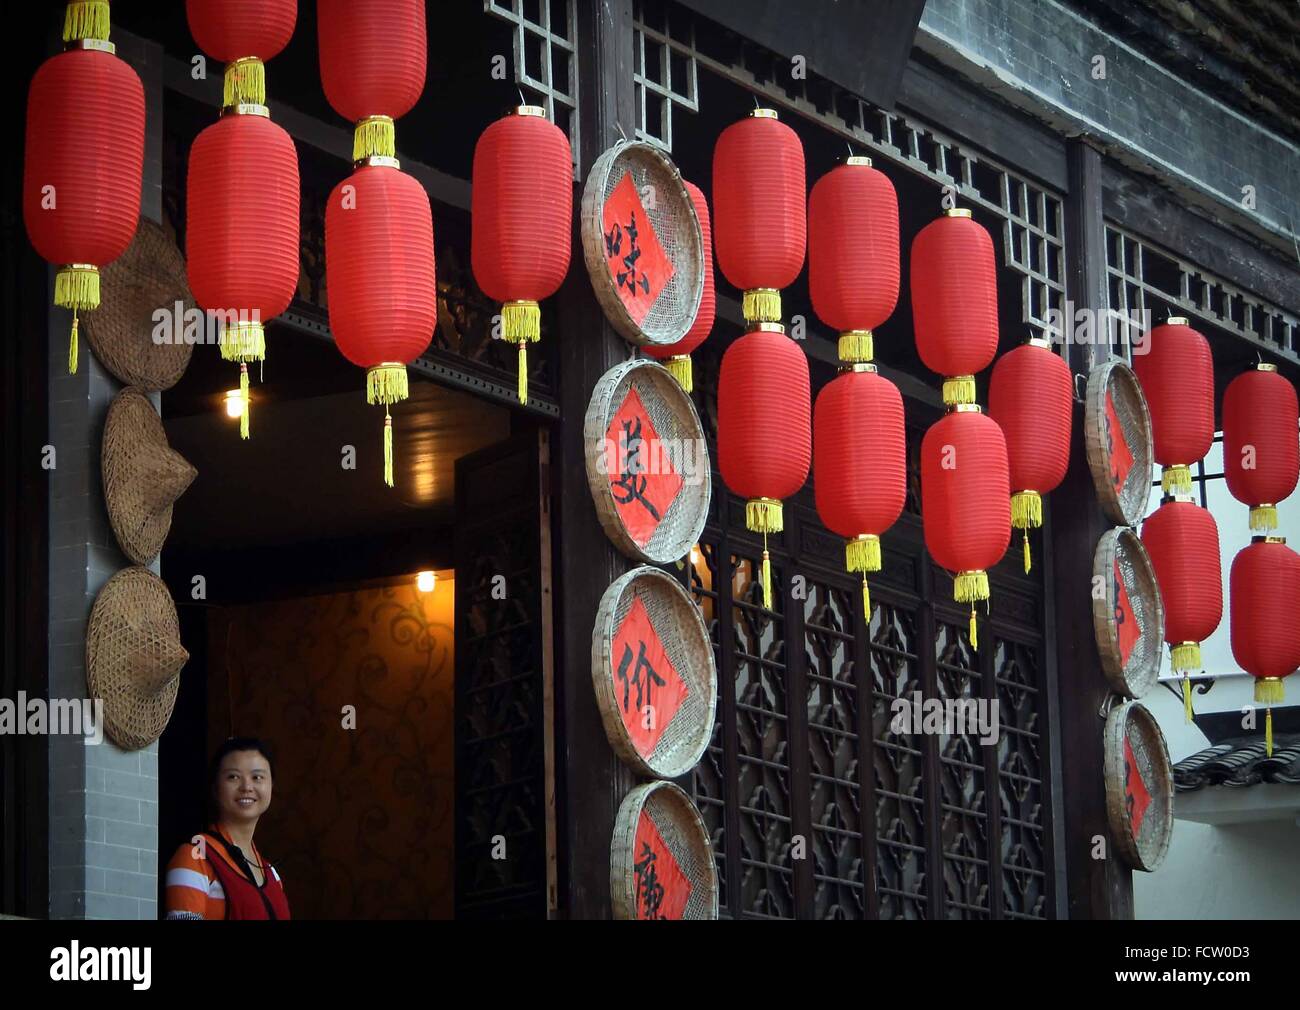 (160125) -- BEIJING, Jan. 25, 2016 (Xinhua) -- Lanterns are hung on the eave of a restaurant in Likeng Village in Wuyuan County, east China's Jiangxi Province, April 1, 2015. Lanterns in China have a long history and they have become synonymous with Chinese culture. Even today, they are still made and enjoyed by the Chinese worldwide. They were used as a means of artistic expression, in terms of functionality, design and decoration. Chinese streets in both cities and towns are decorated with red lanterns during festivals, especially Chinese Lunar New Year, Mid-Autumn Festival and Lantern Festi Stock Photo